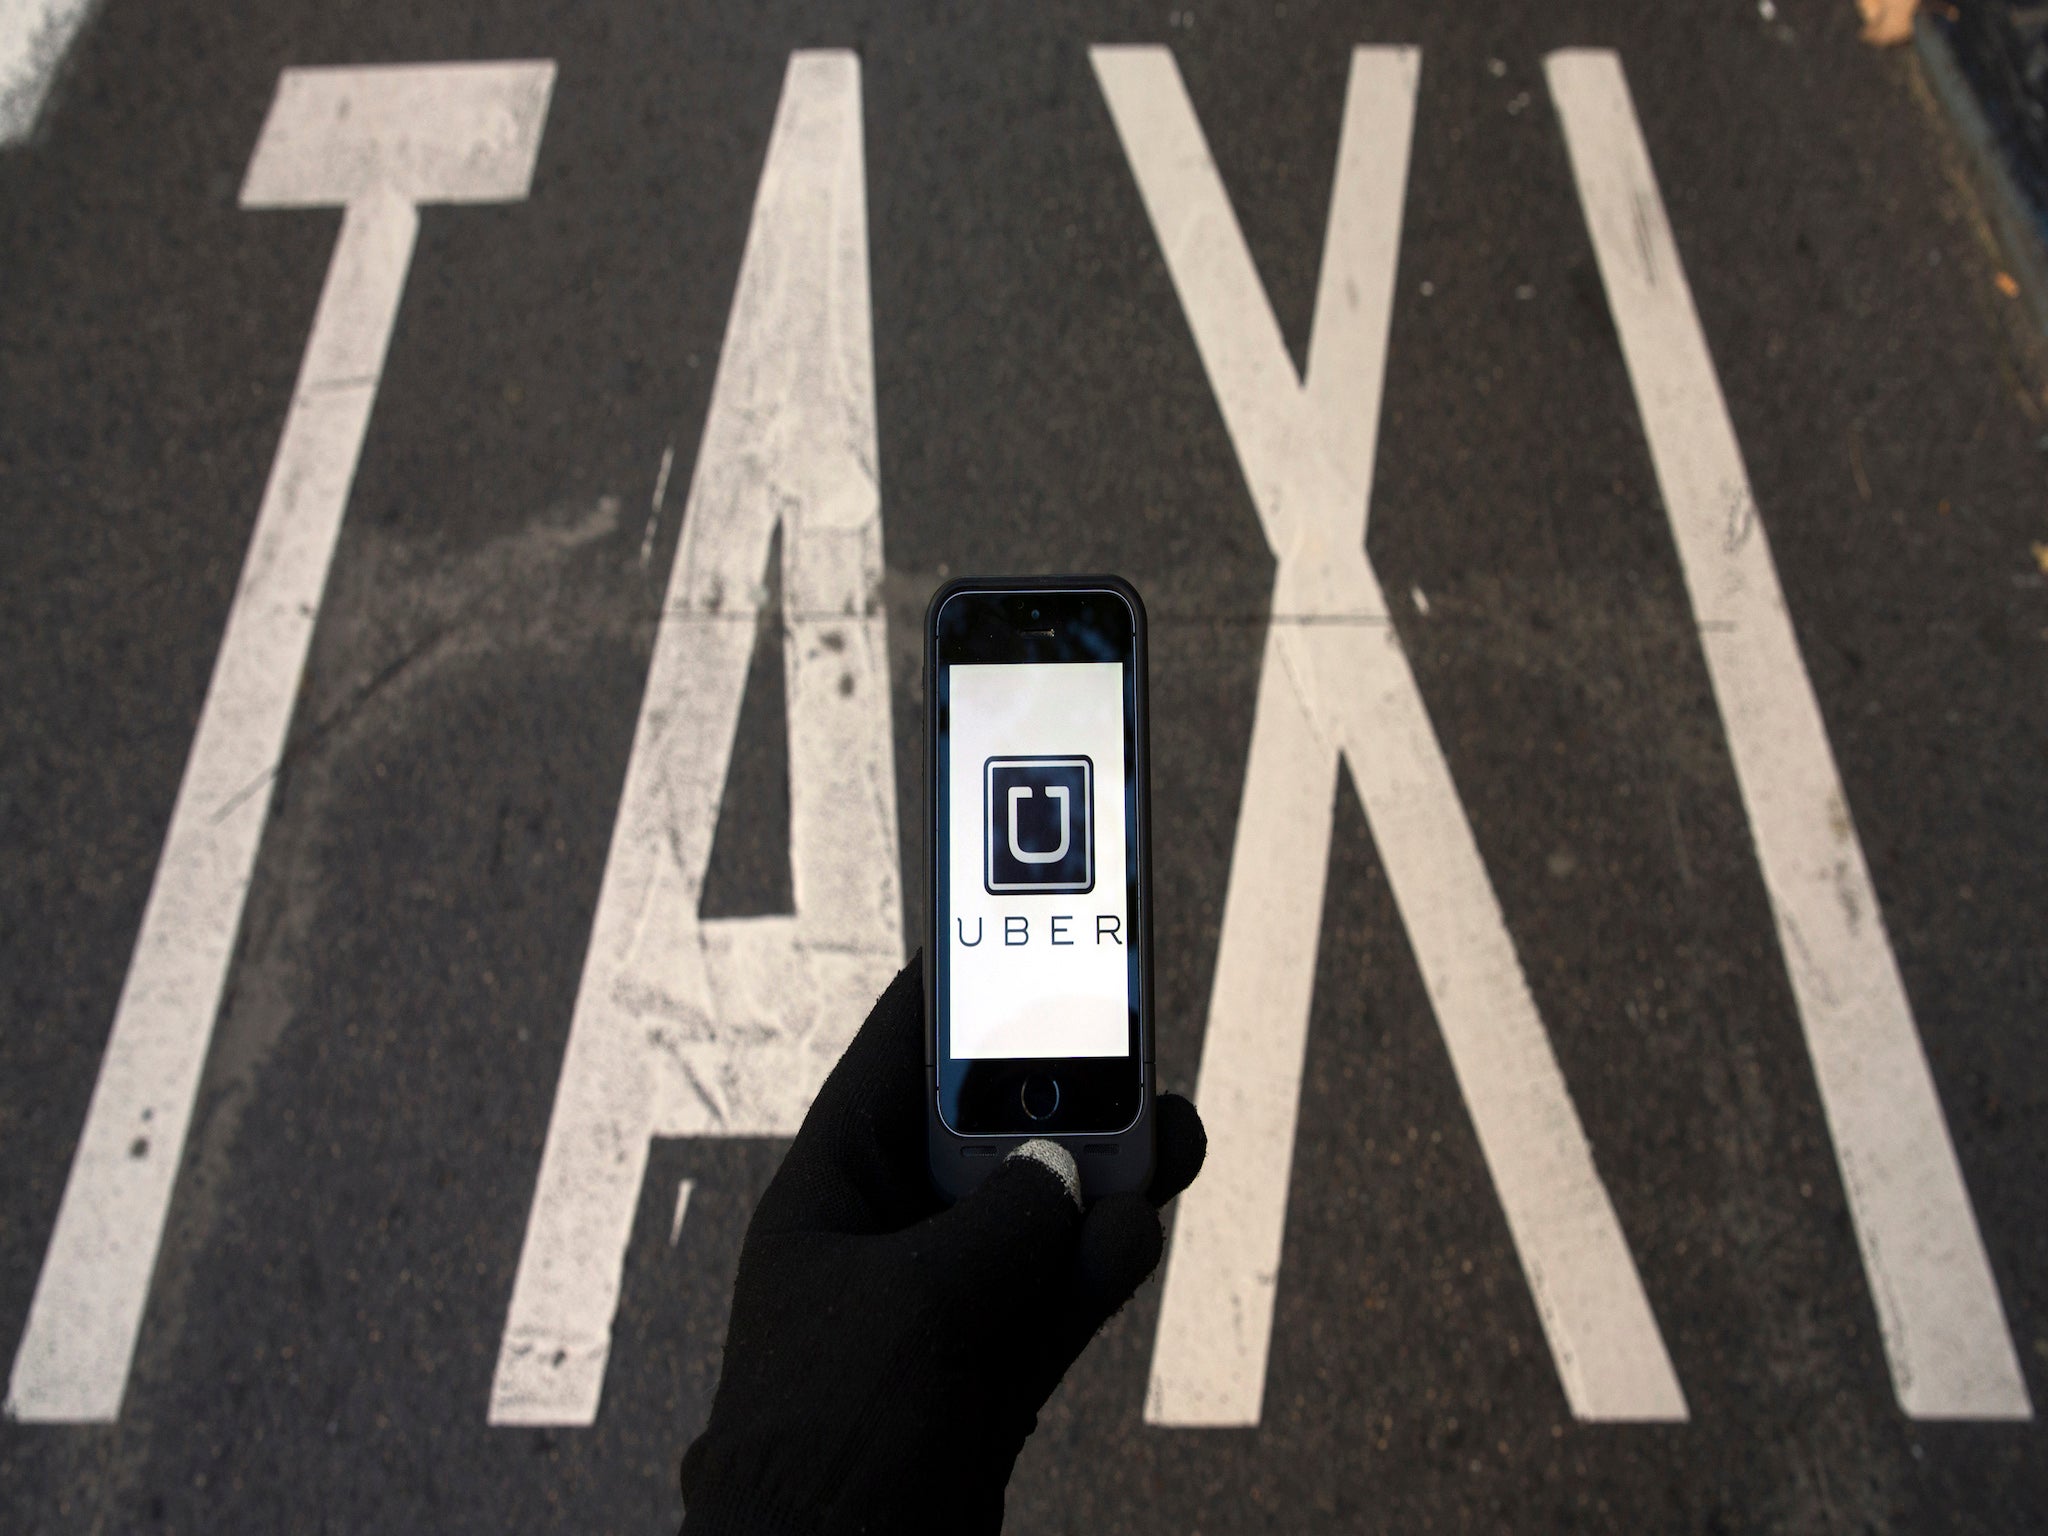 Traditional taxi firms have opposed the presence of Uber